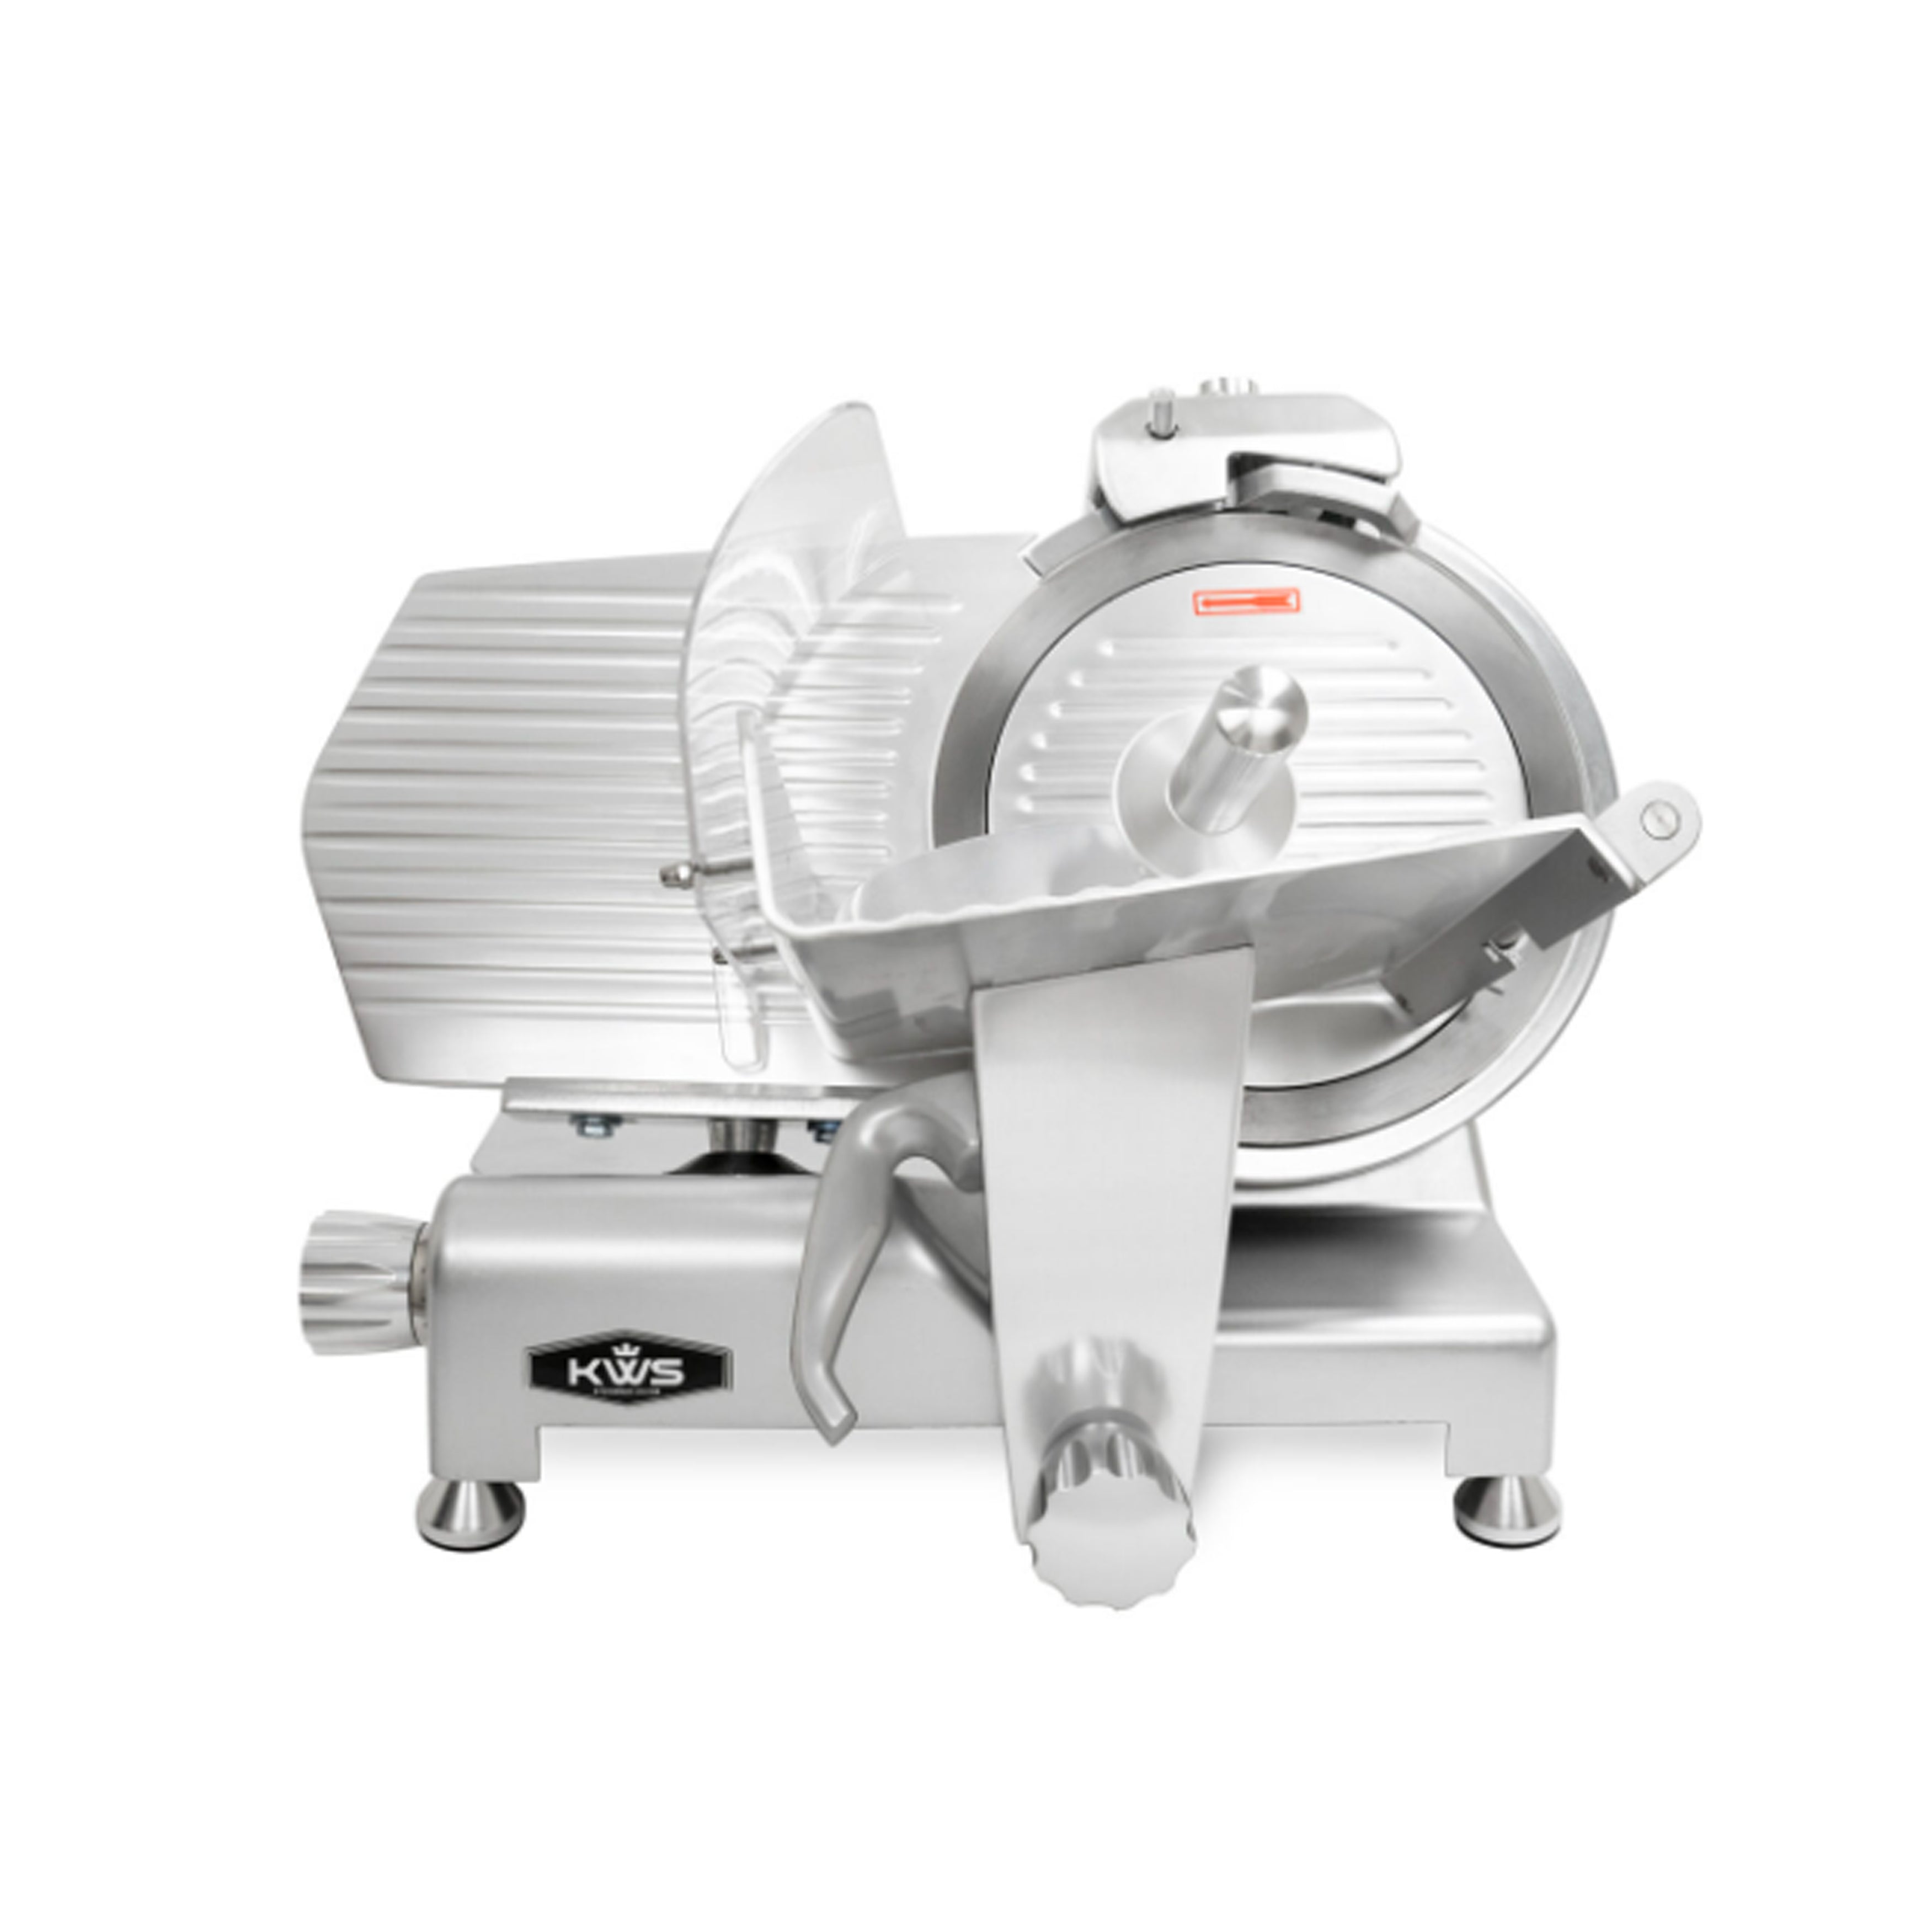 KWS - MS-12ES, Commercial 12″ Metal Collection Electric Meat Slicer with Teflon Blade